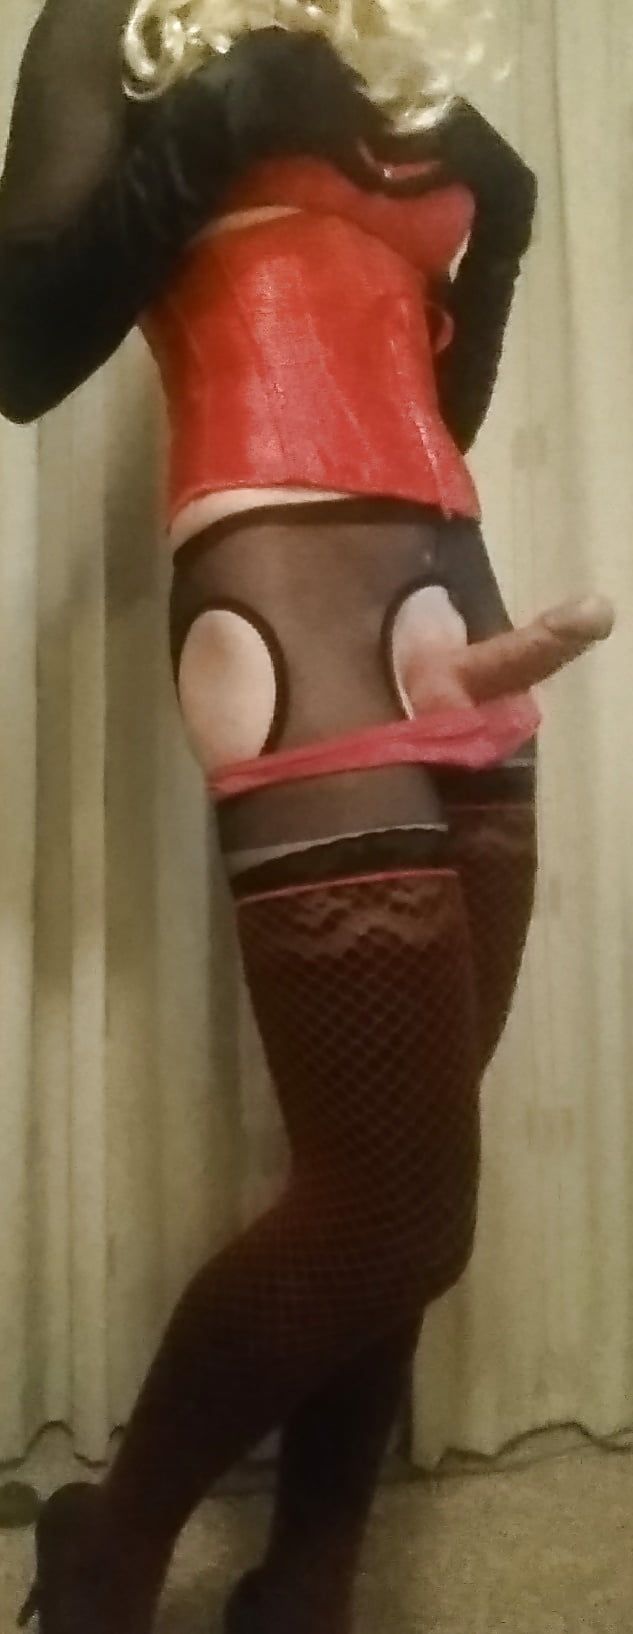 Red and Black lingerie and my hard cock #13